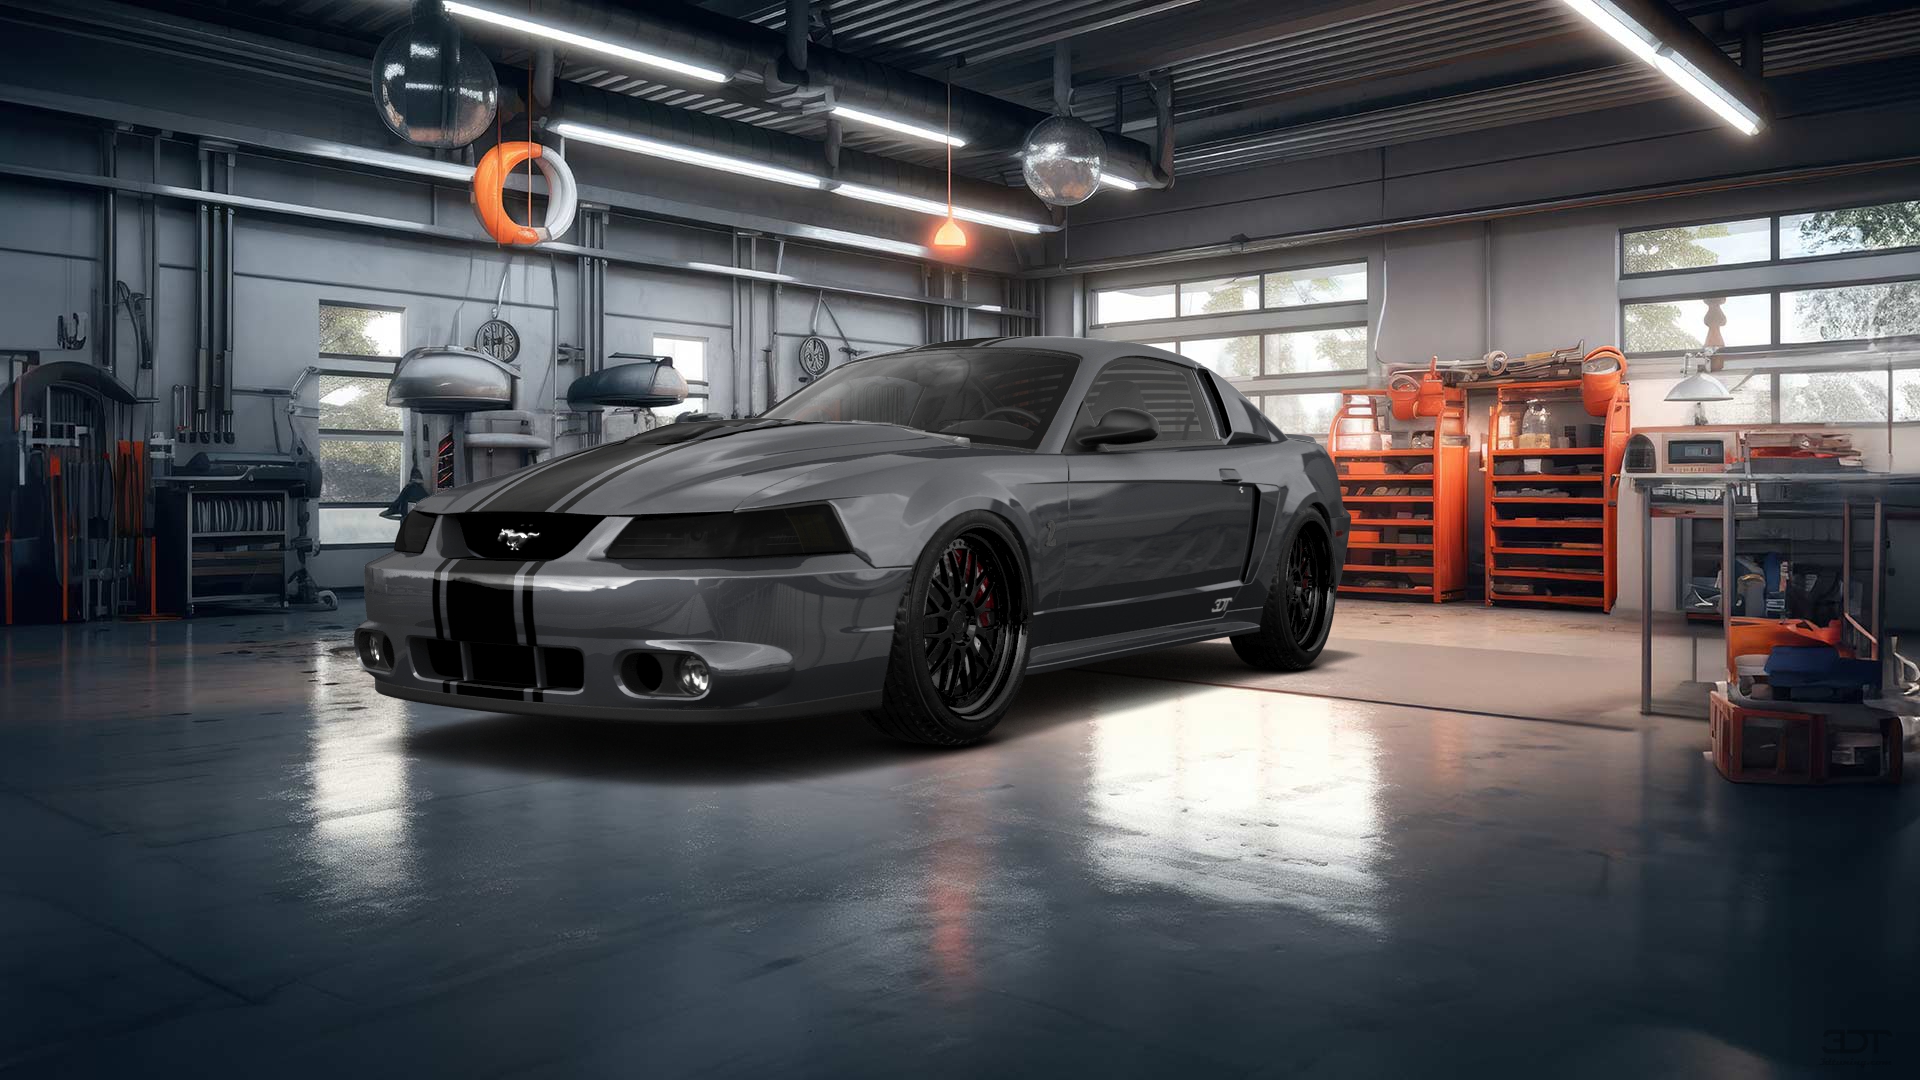 Ford Mustang 2 Door Coupe 2000 tuning